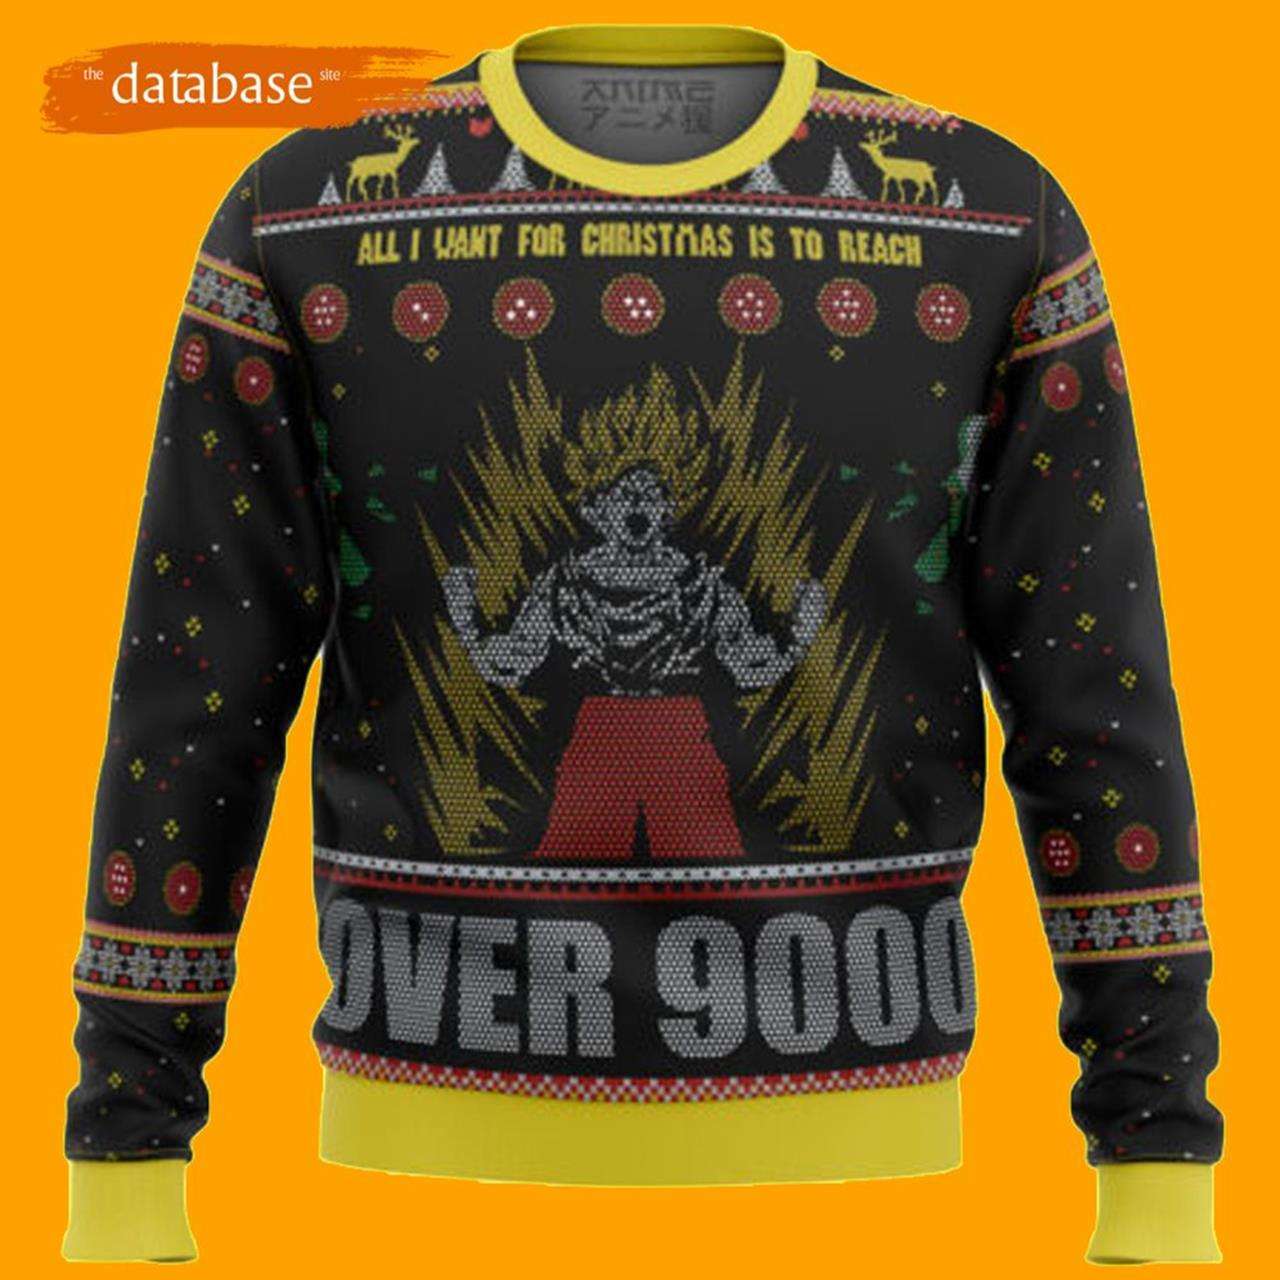 Mery Christmas All I Want For Christmas Is To Reach Dragon Ball Z Ugly Christmas Sweater Xmas Over 9000